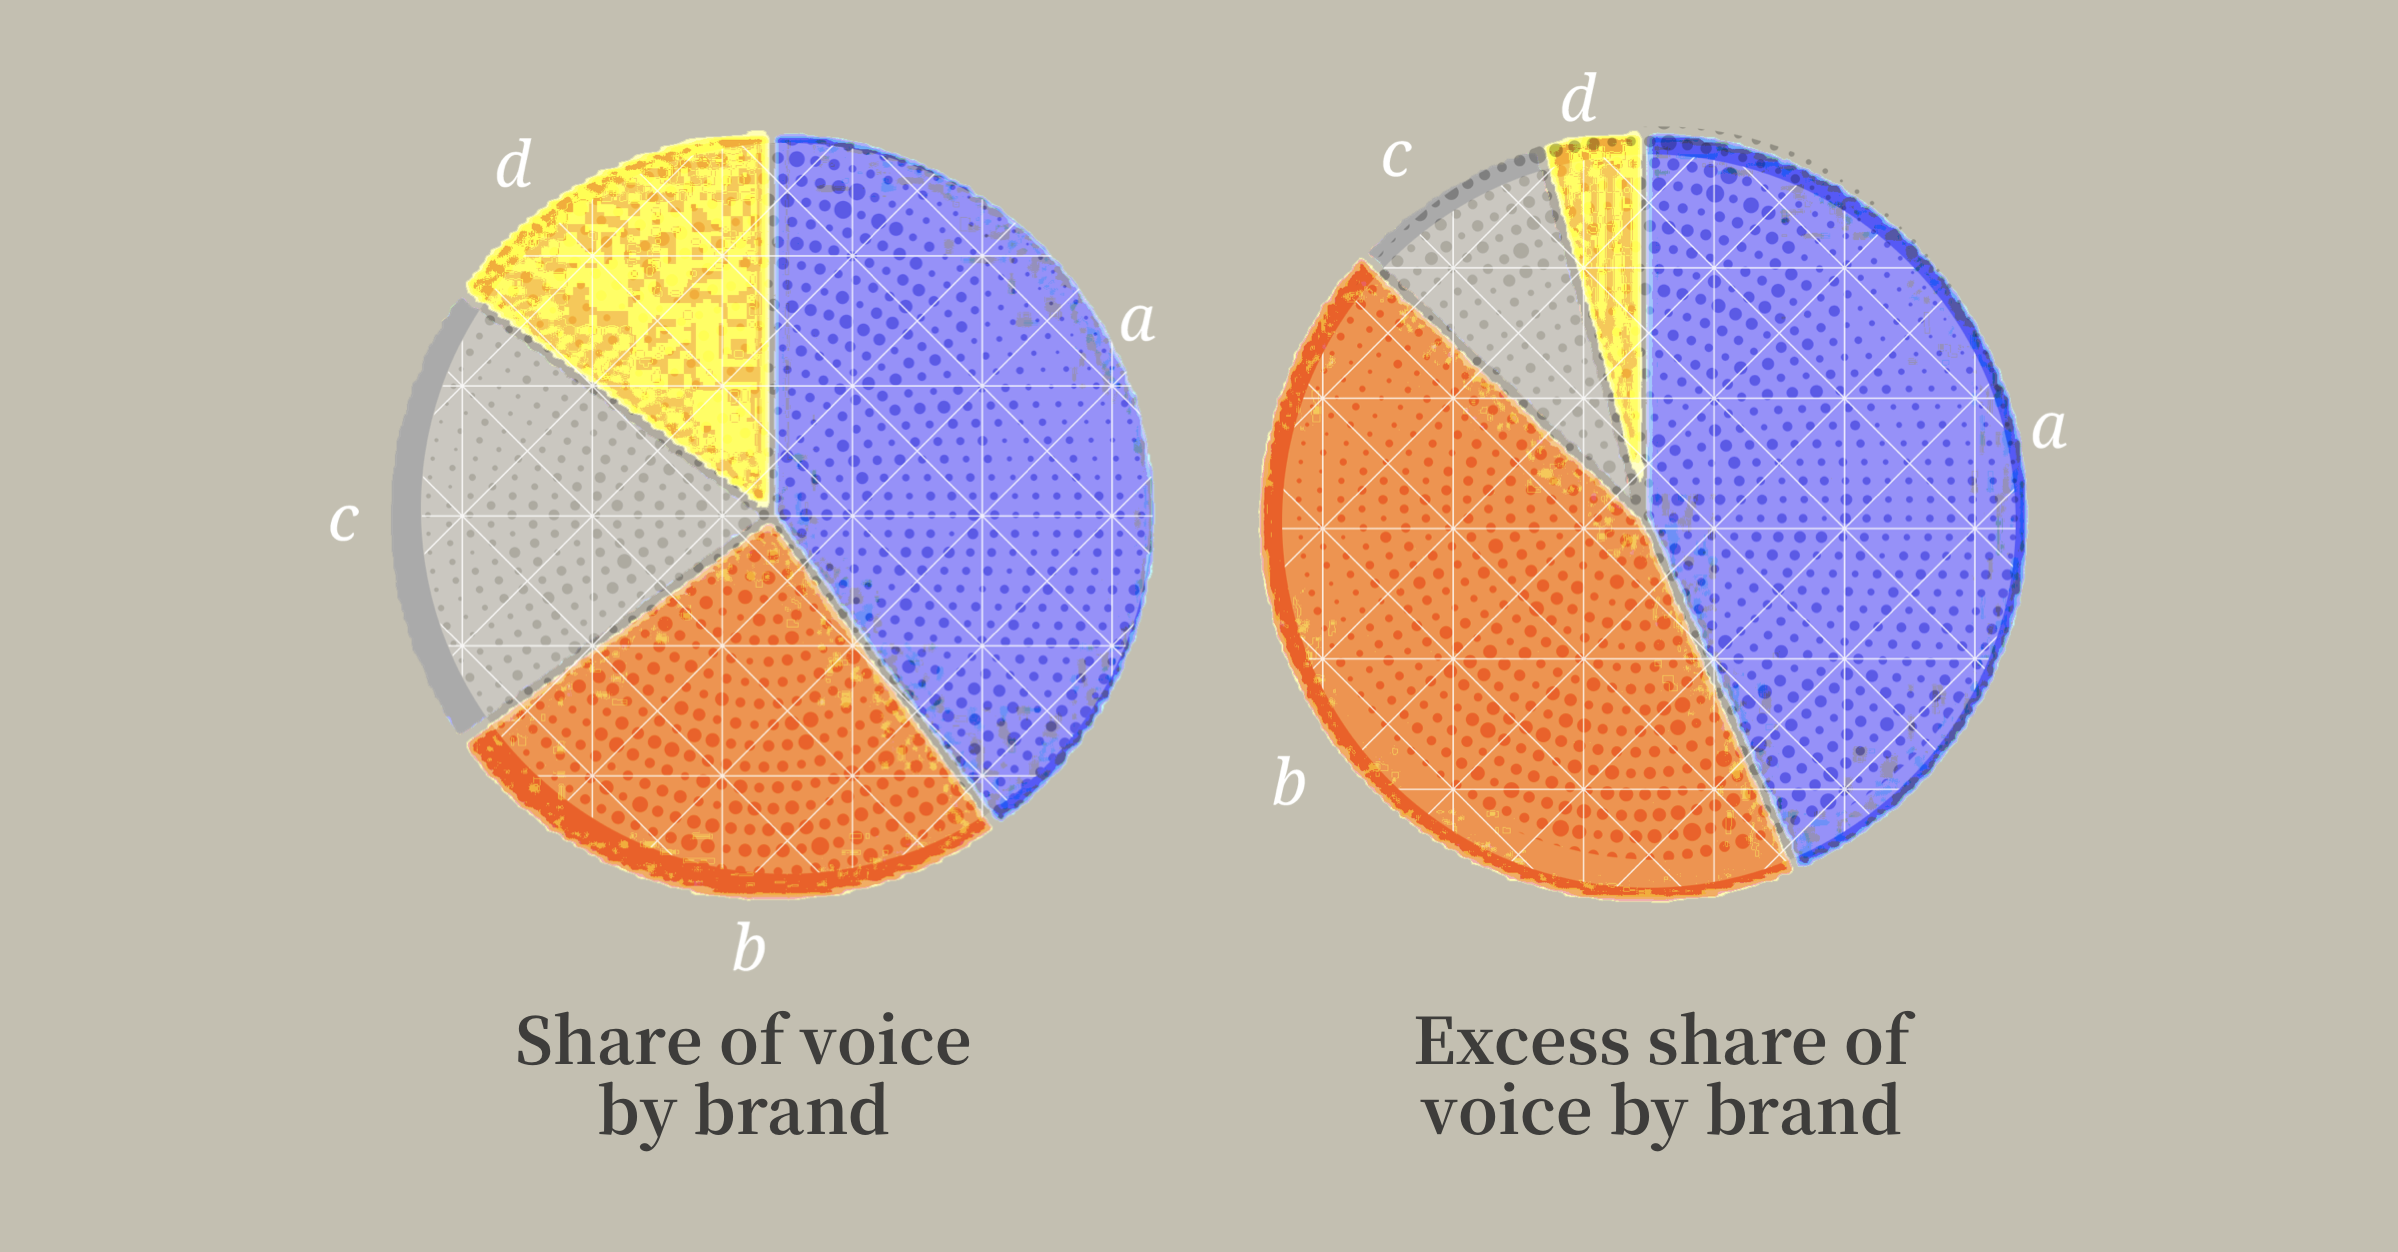 Two pie charts showing share of voice by brand and excess share of voice by brand